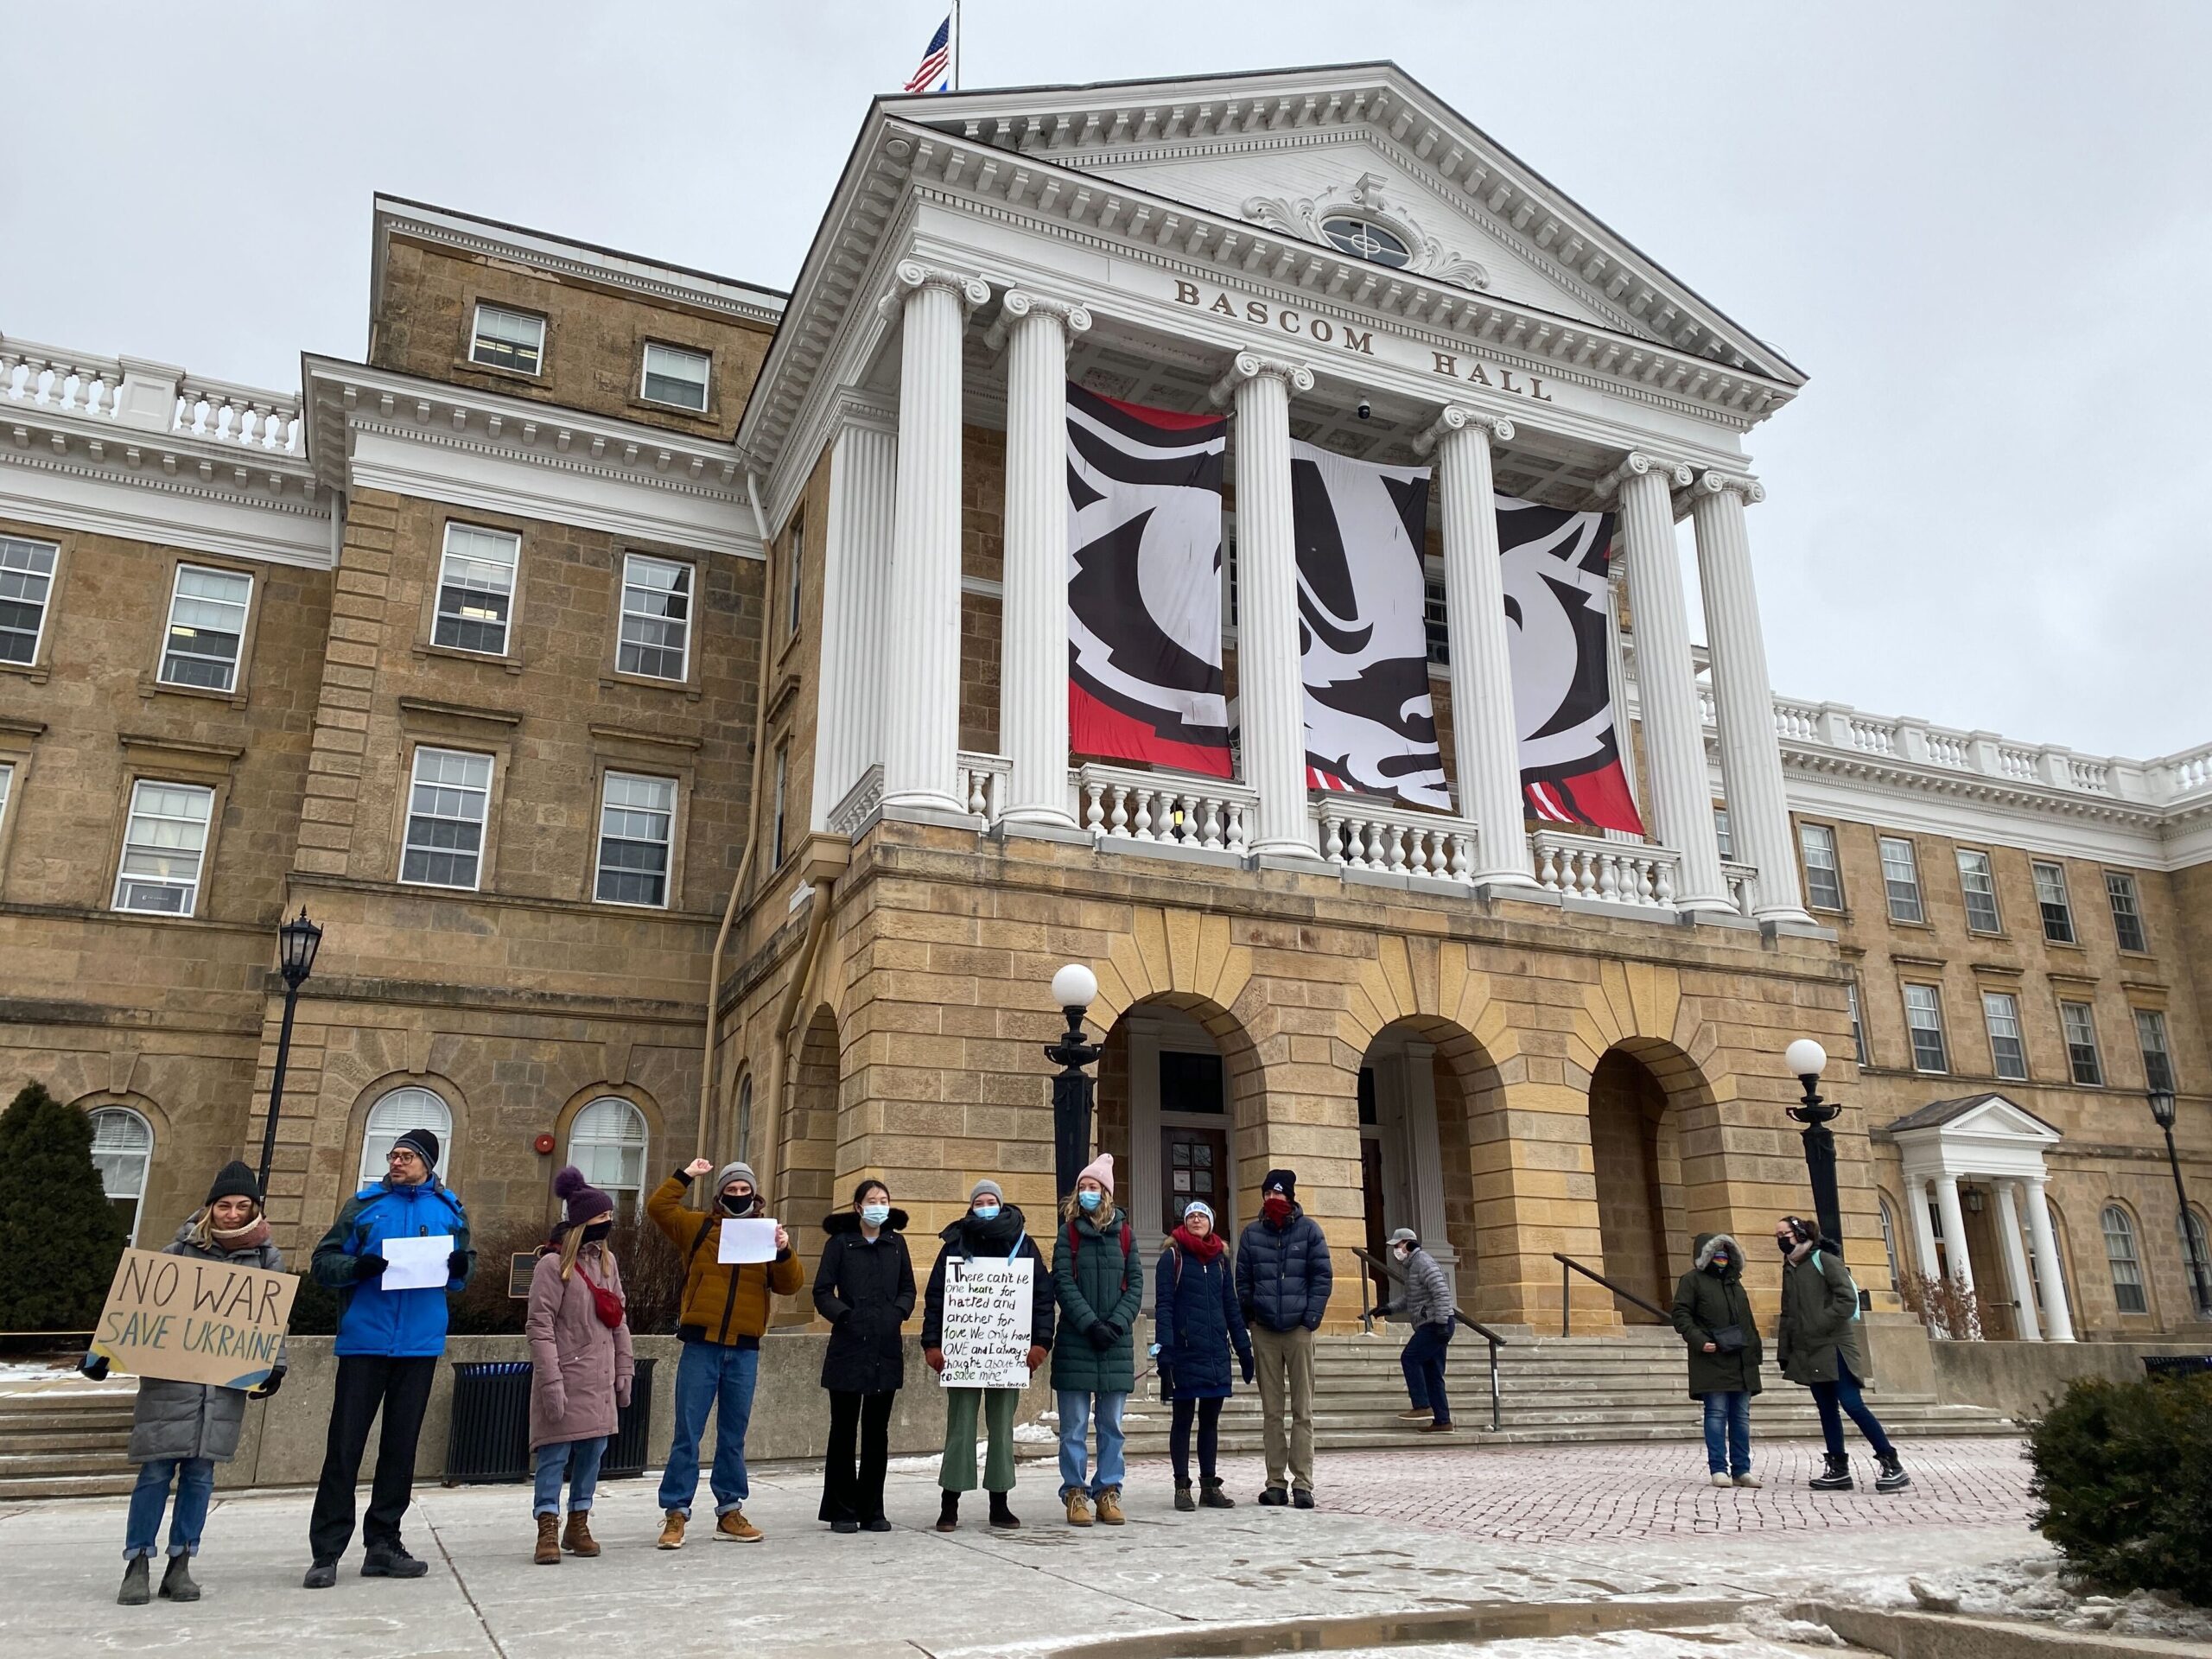 University of Wisconsin-Madison students gather to protest Russia’s invasion of Ukraine in front of Bascom Hall on Thursday